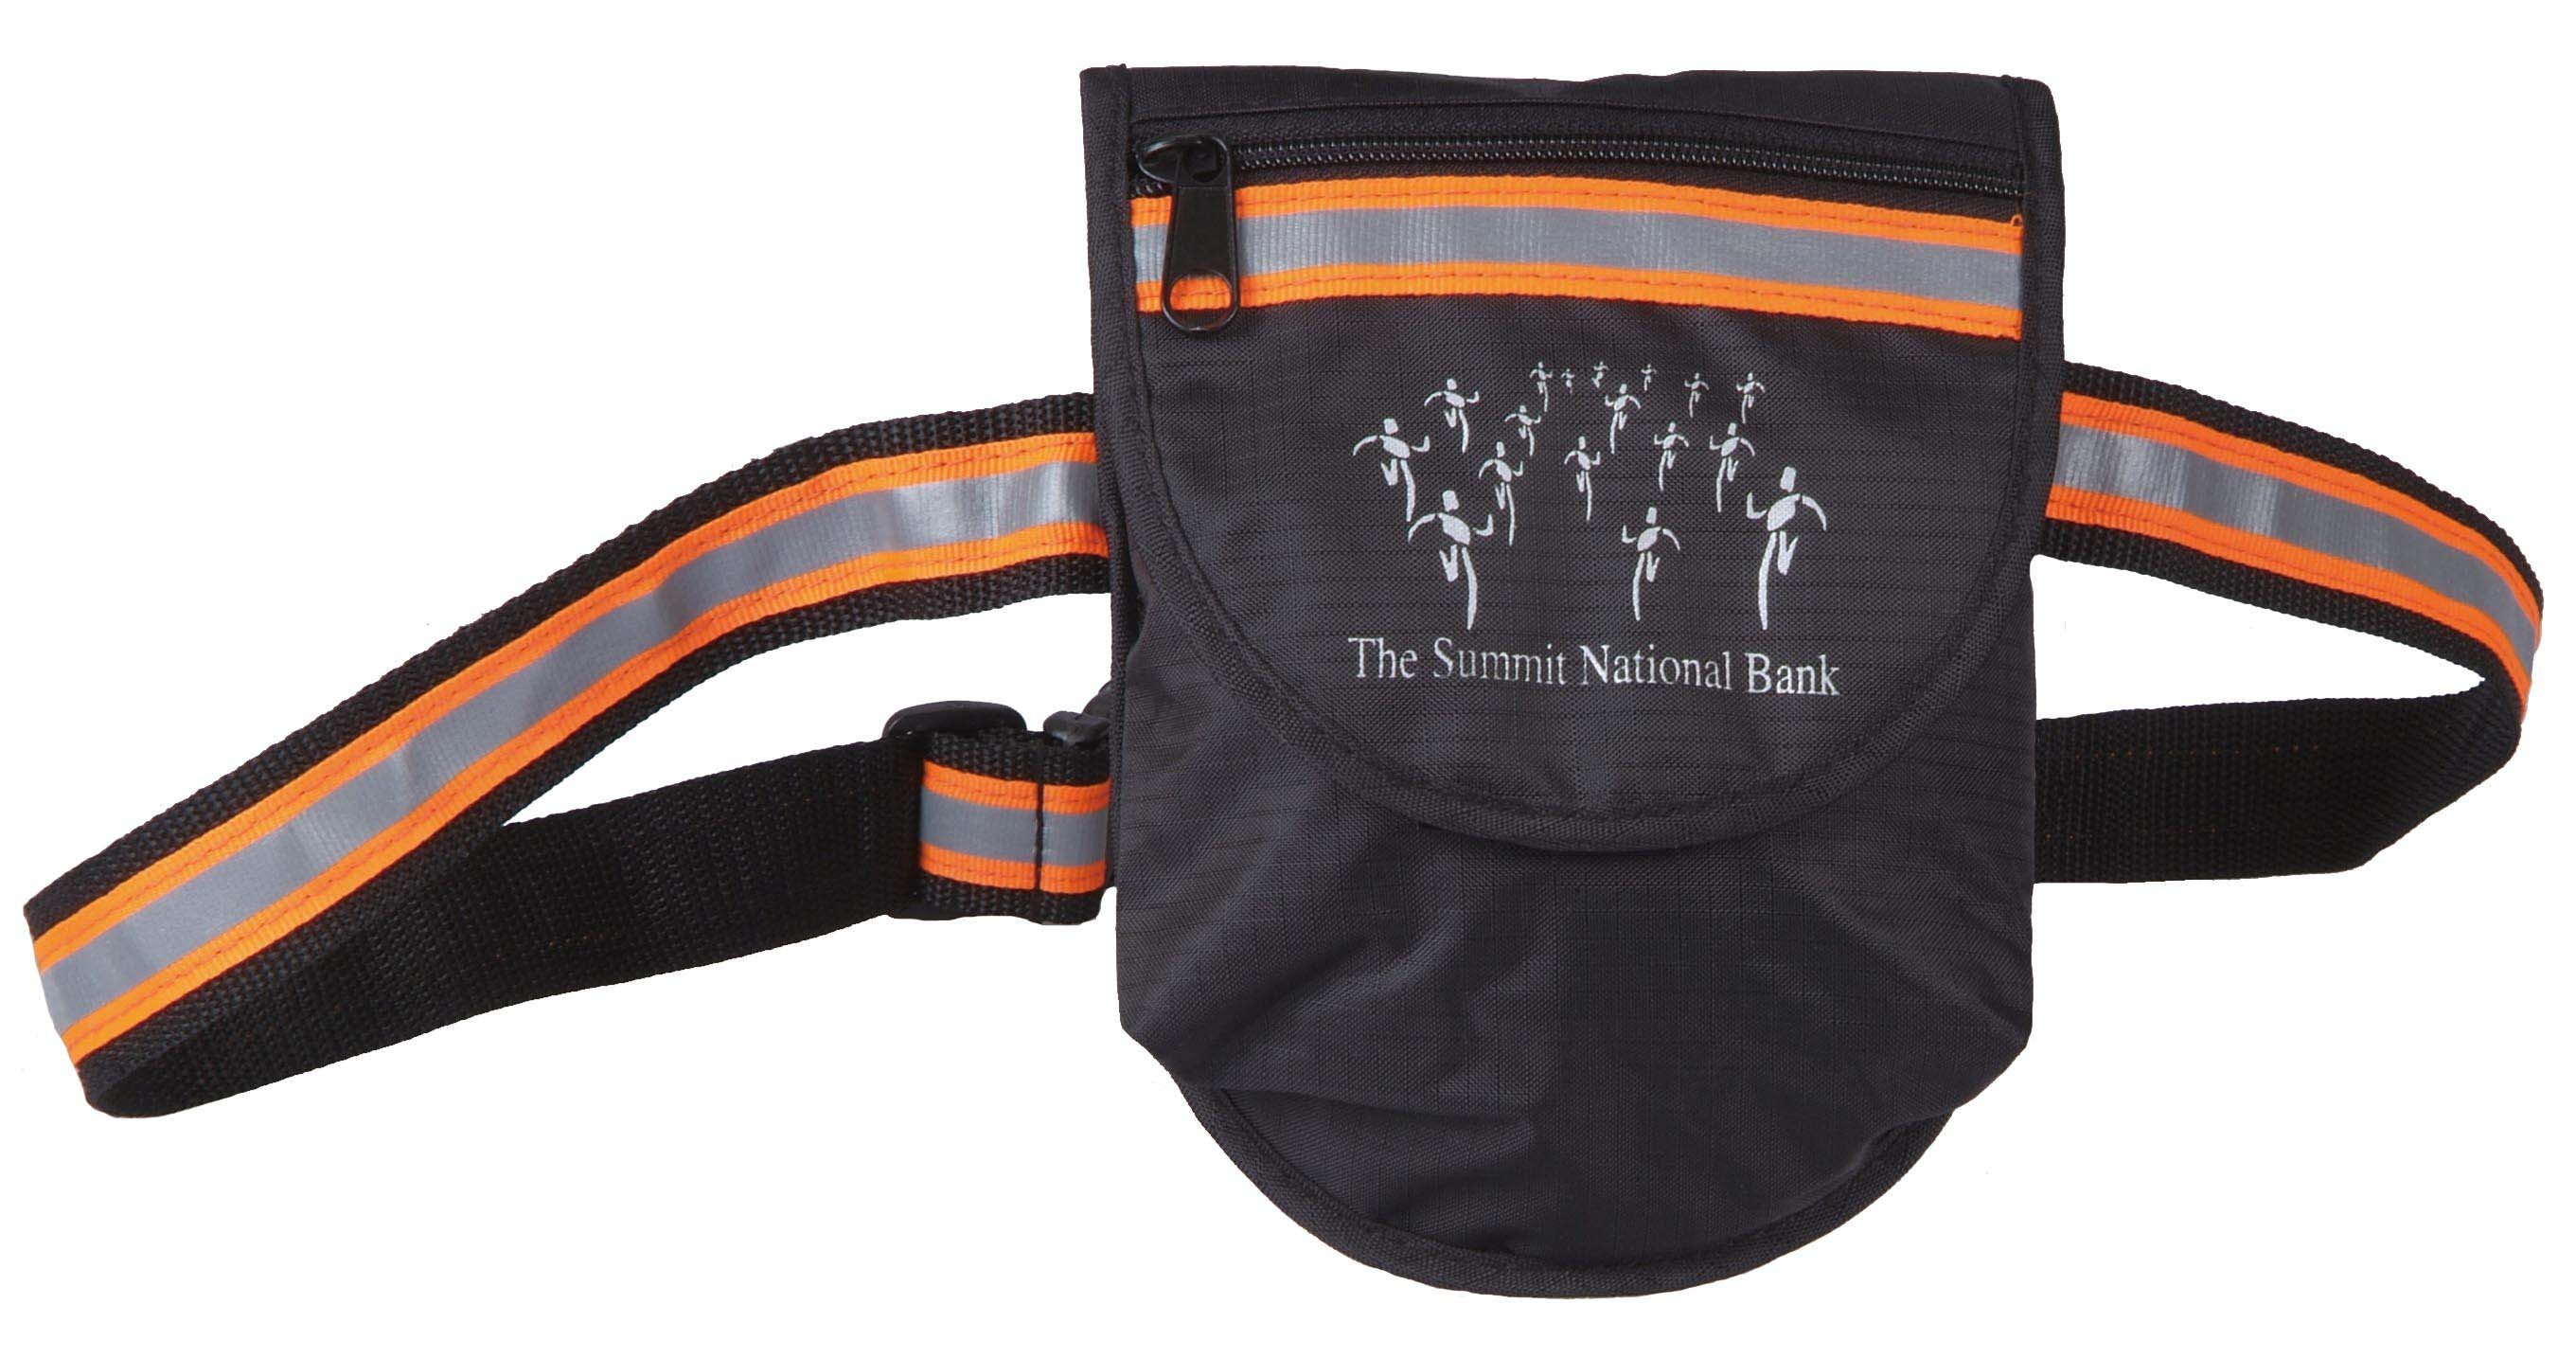 B1109 - The Jogger's Reflective Fanny Pack